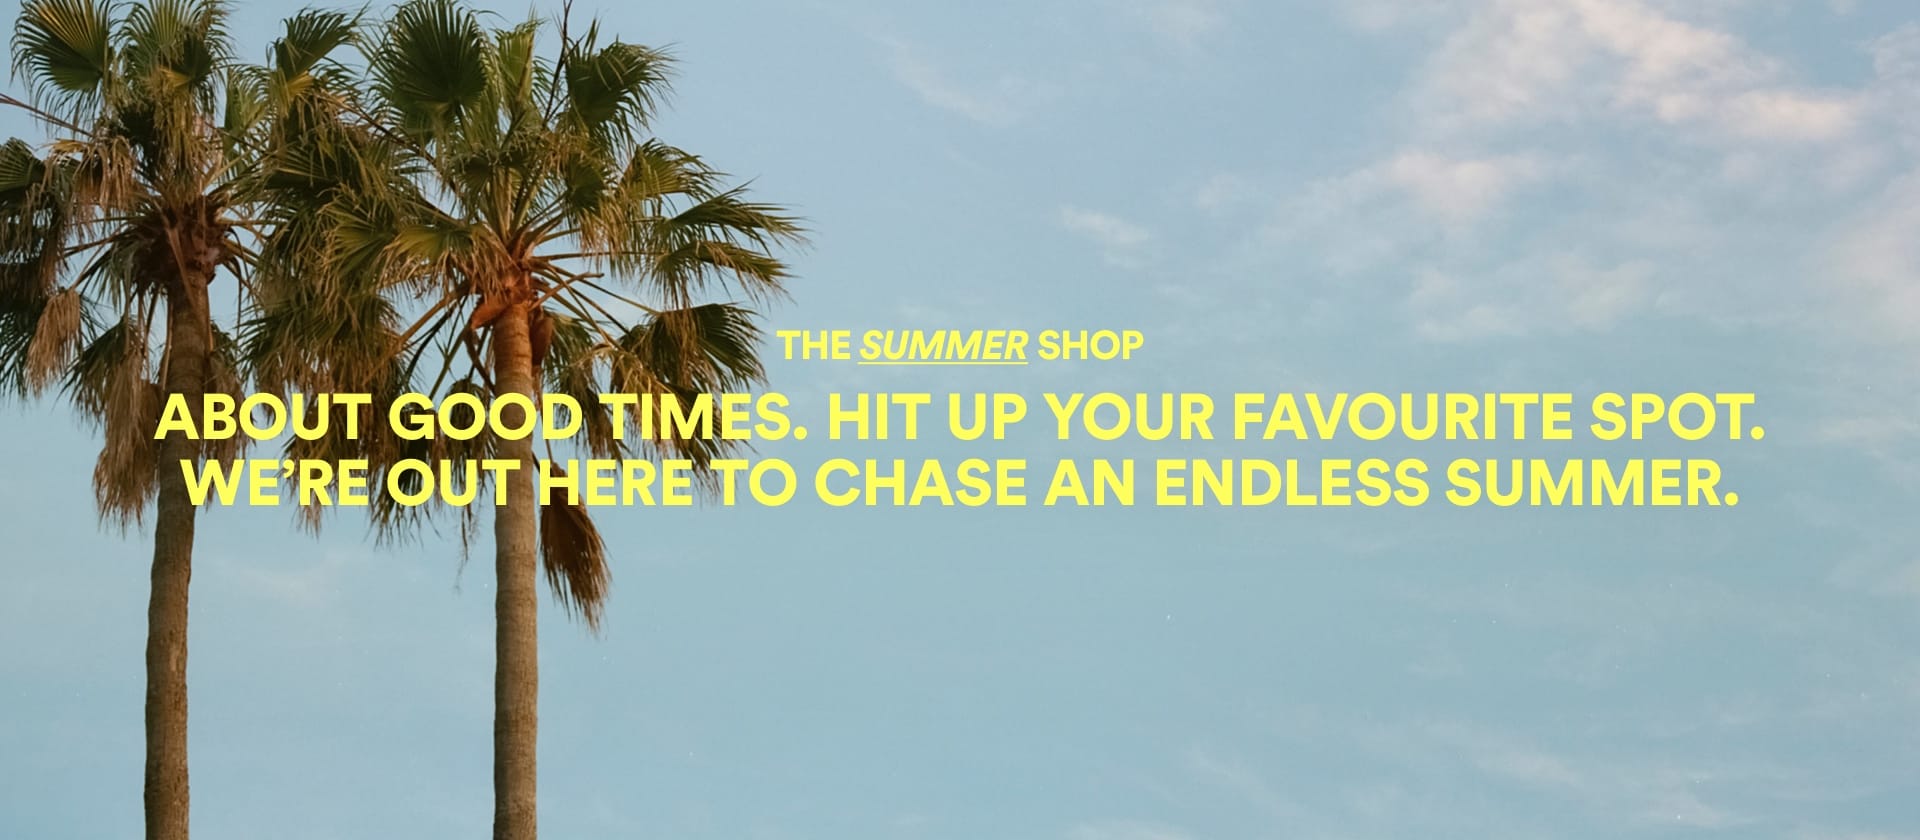 The Summer Shop | About good times. Hit up your favourite spot. We're out here to chase an endless summer.